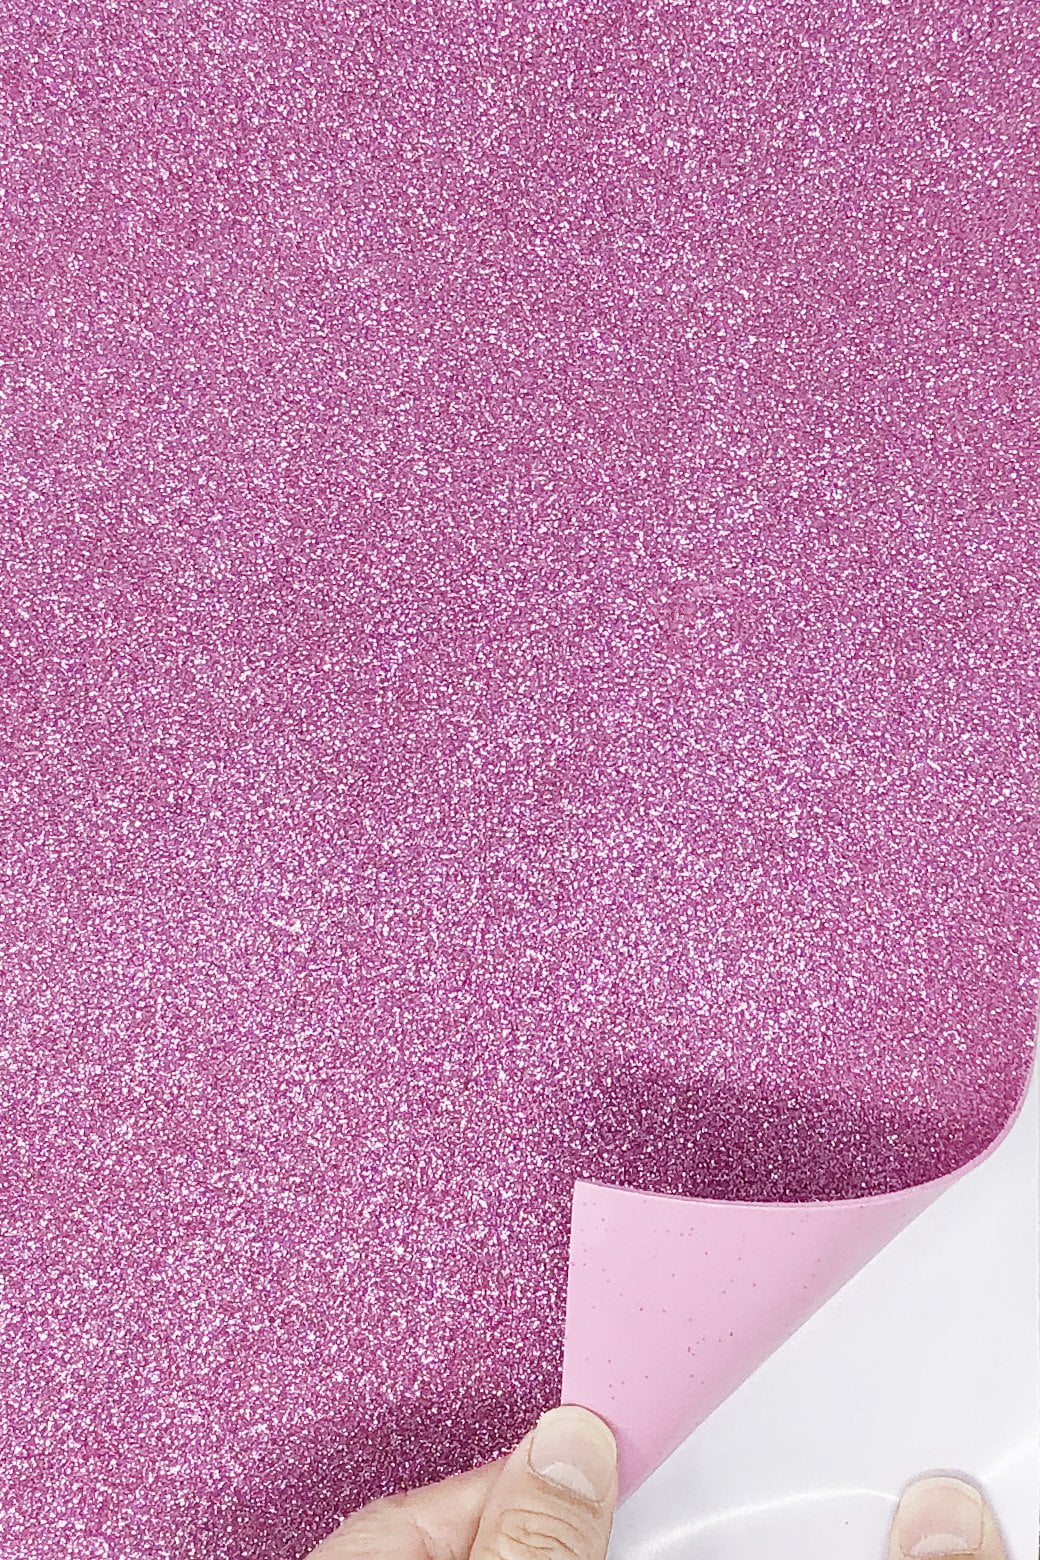 BalsaCircle 10 Pieces 12x10 Hot Pink Extra Fine Glittered Self-Adhesive  Foam Sheets 